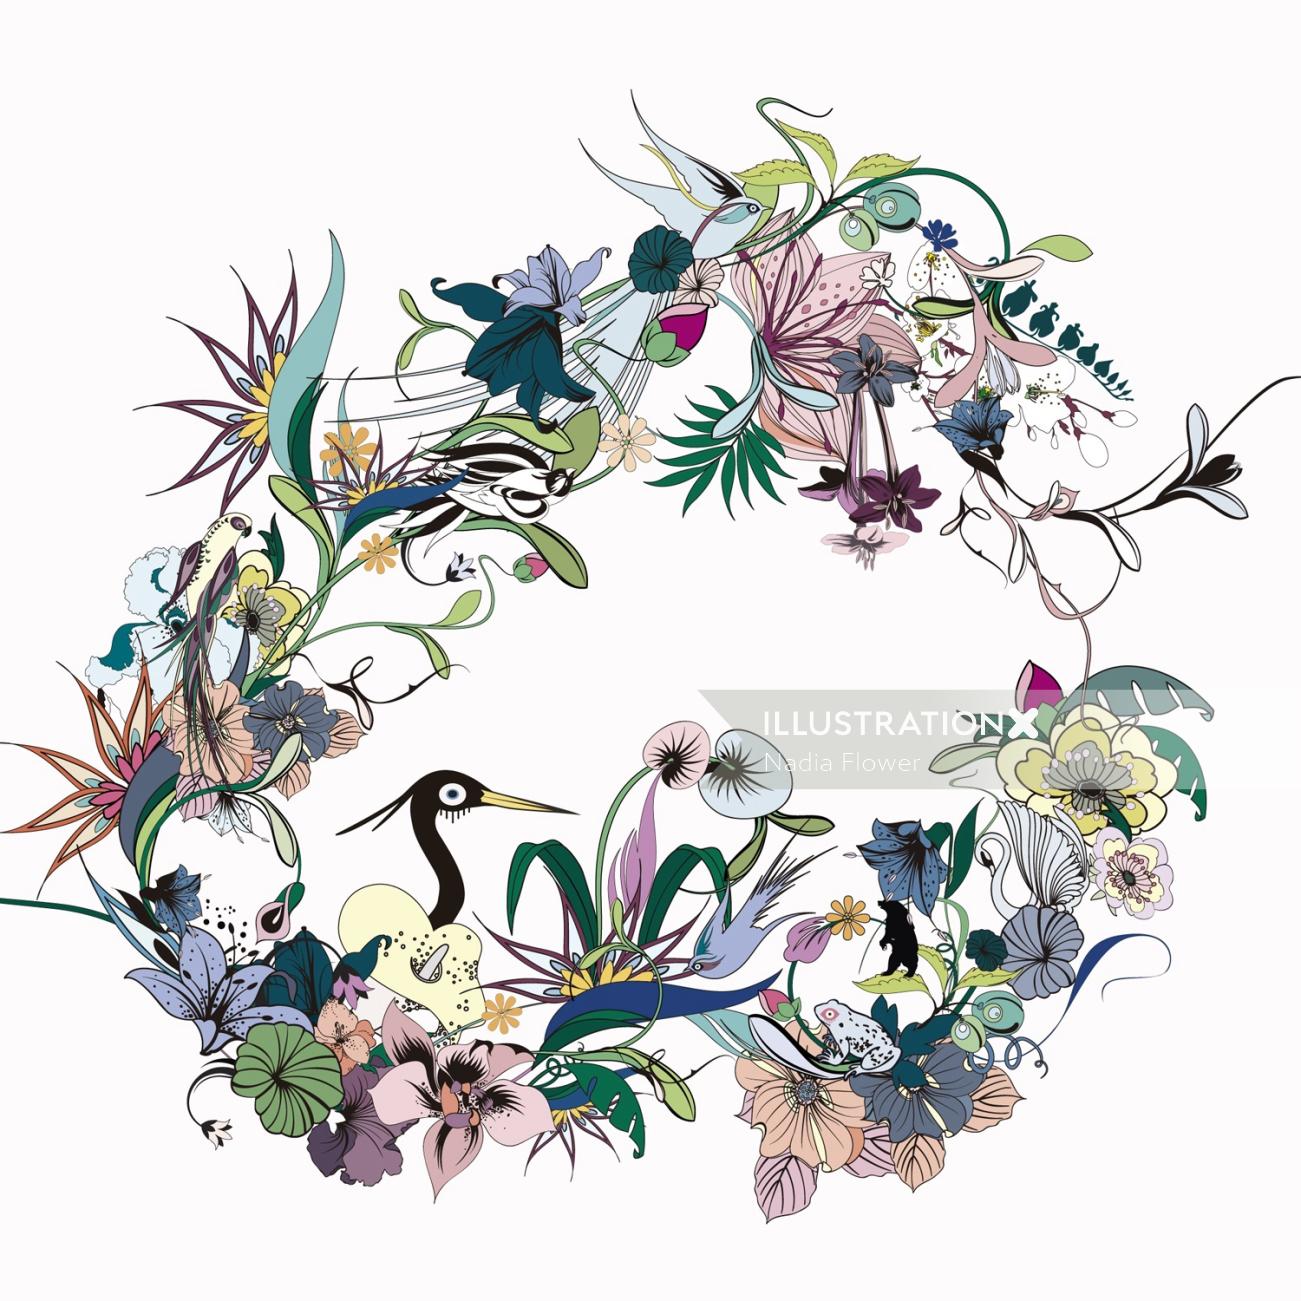 Graphic art of animals and flowers